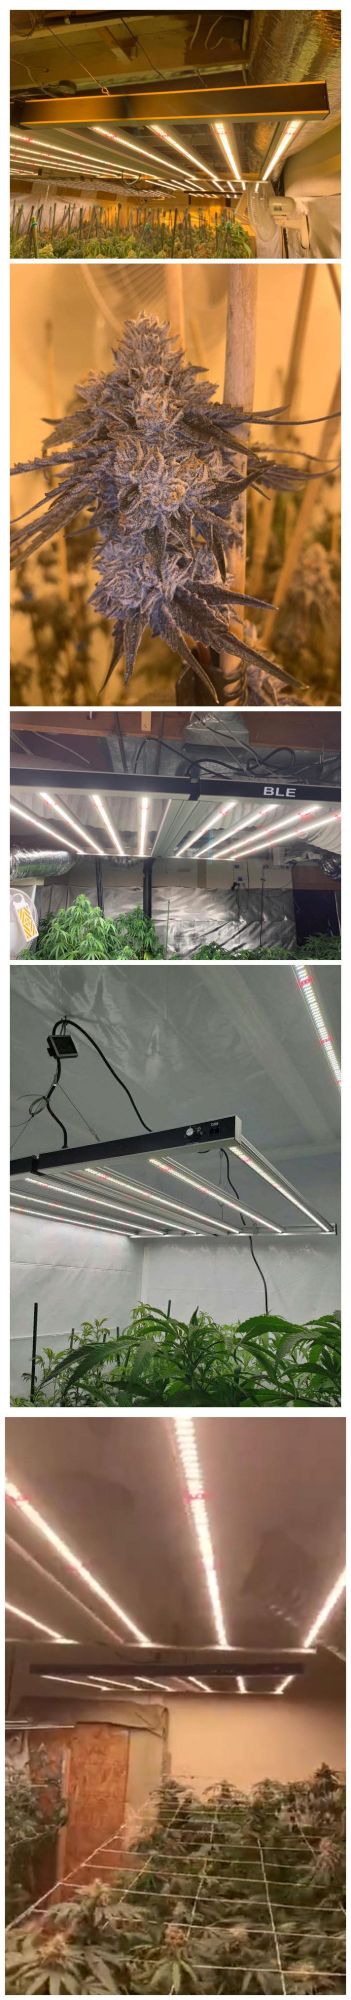 Wholesale LED Grow Lights Horticulture Indoor Plant Greenhouse Grow Tent Full Spectrum Best LED Grow Light Bar